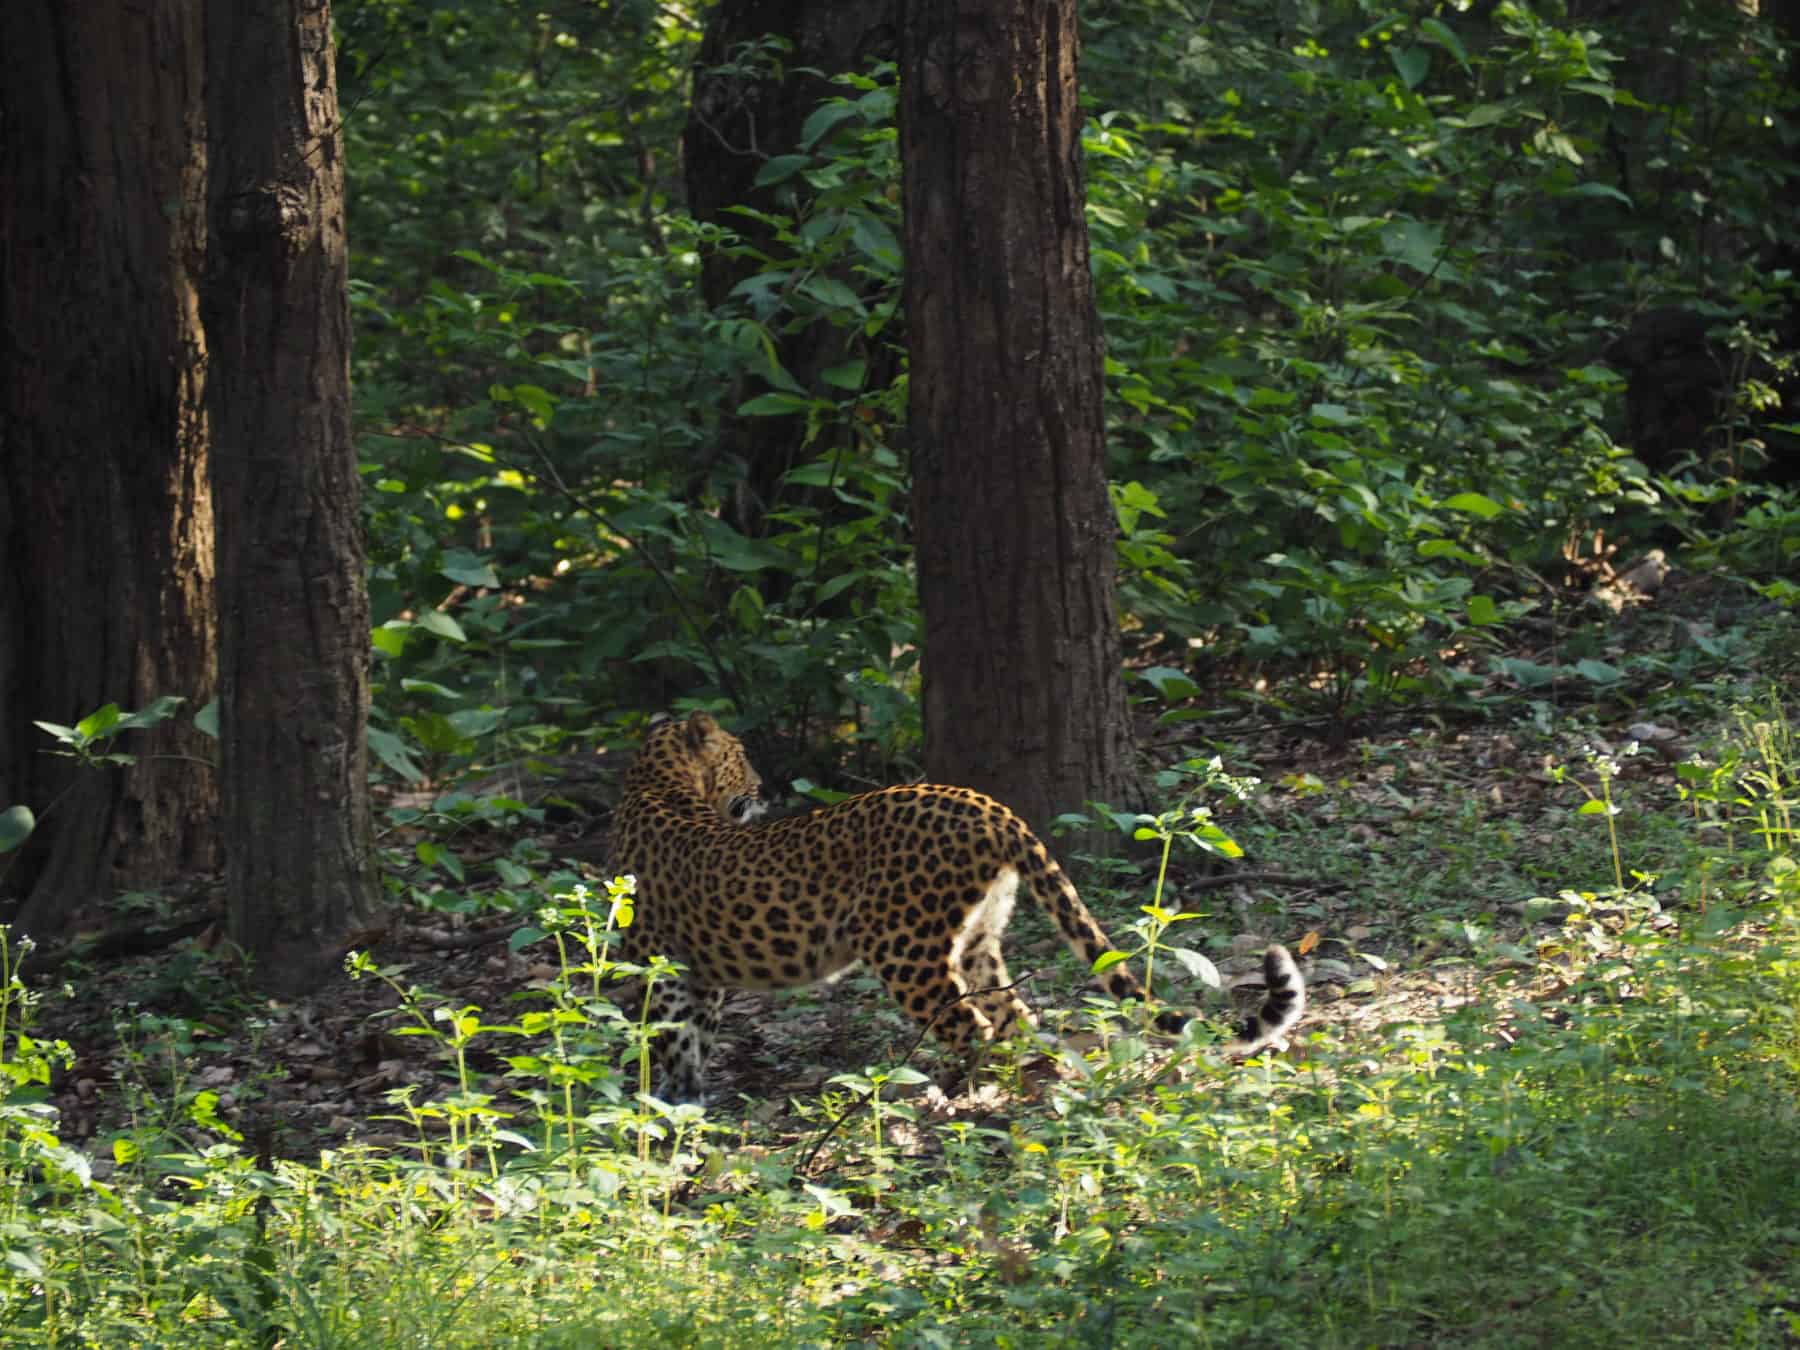 Leopard mother in Kanha National Park India